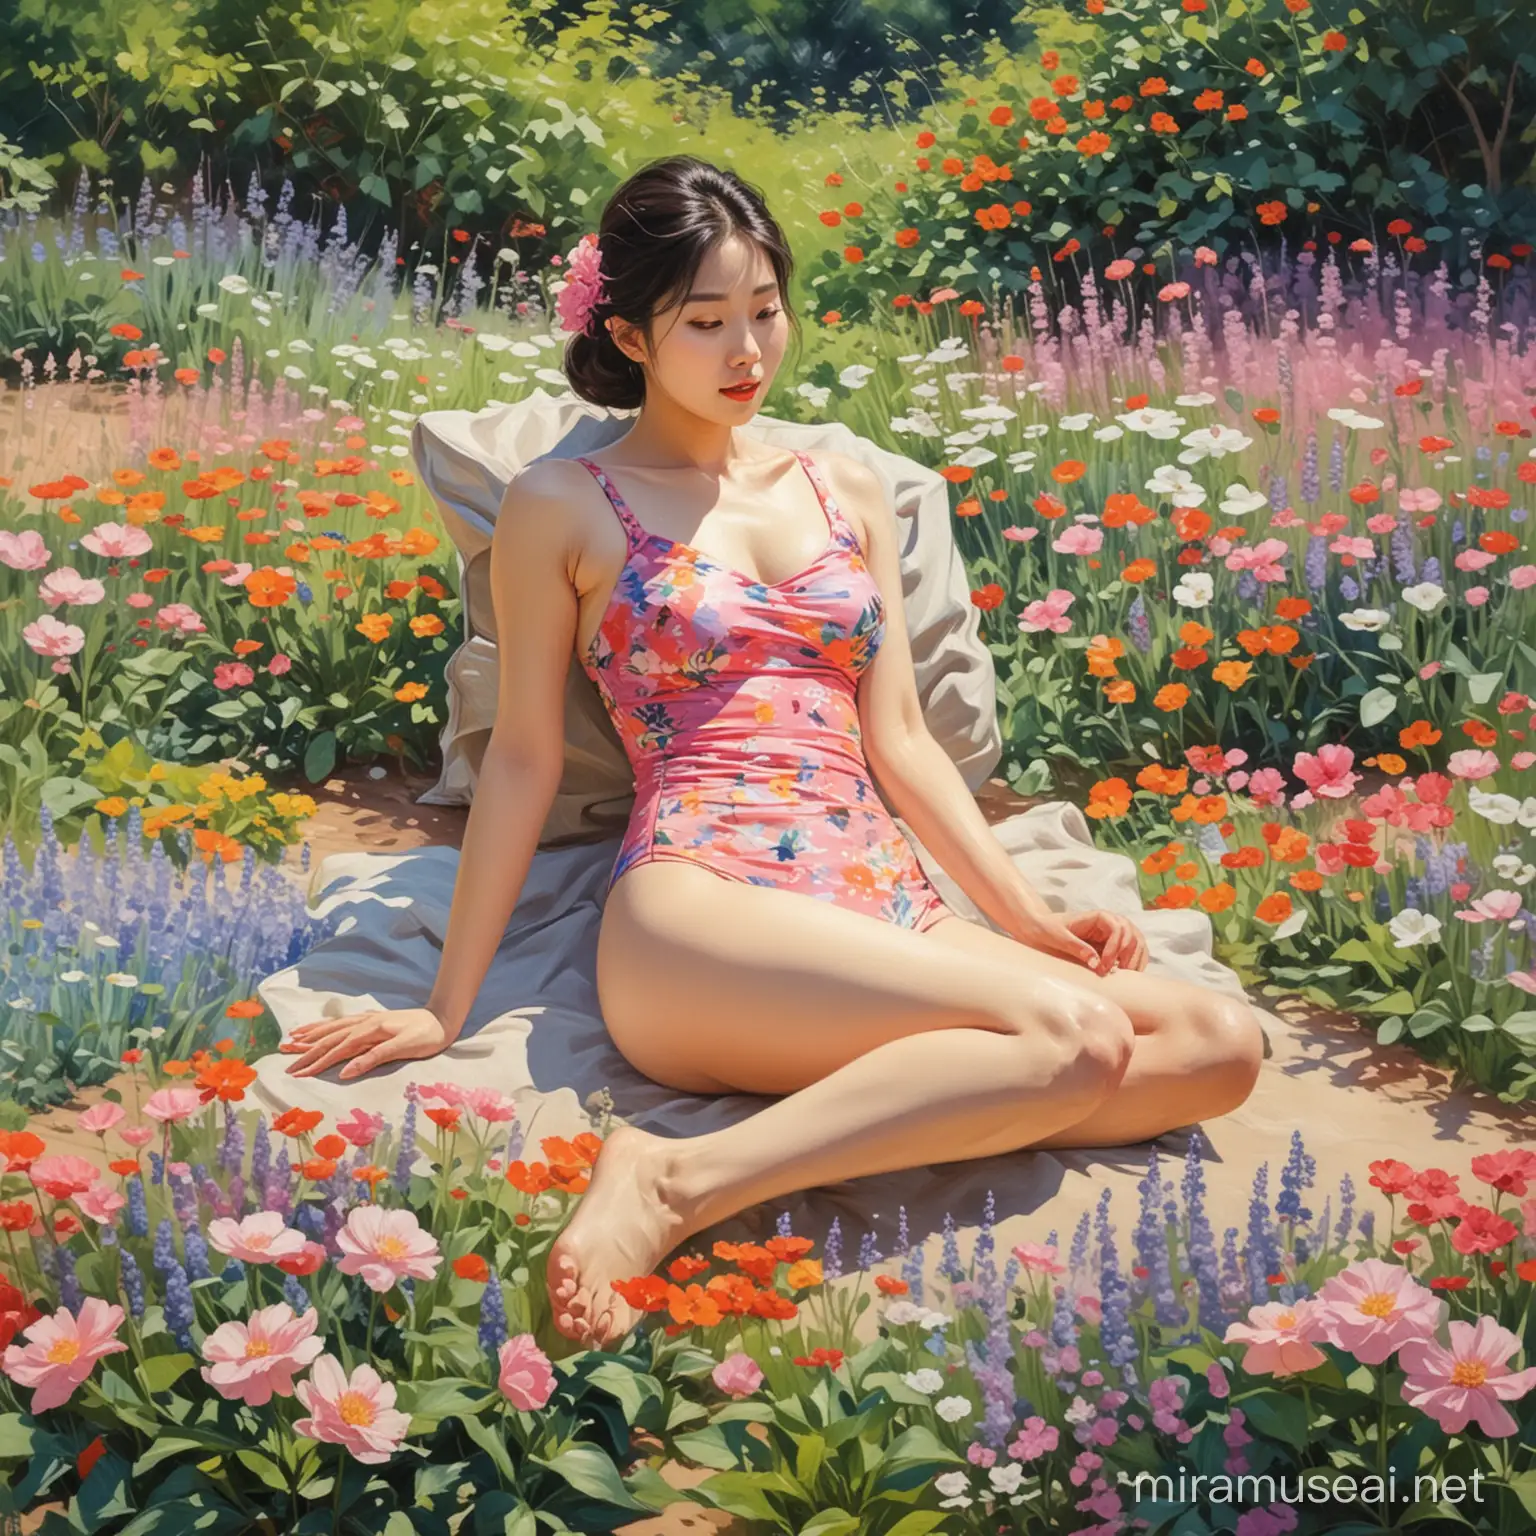 Korean Woman Lounging in Floral Paradise Impressionist Swimsuit Art